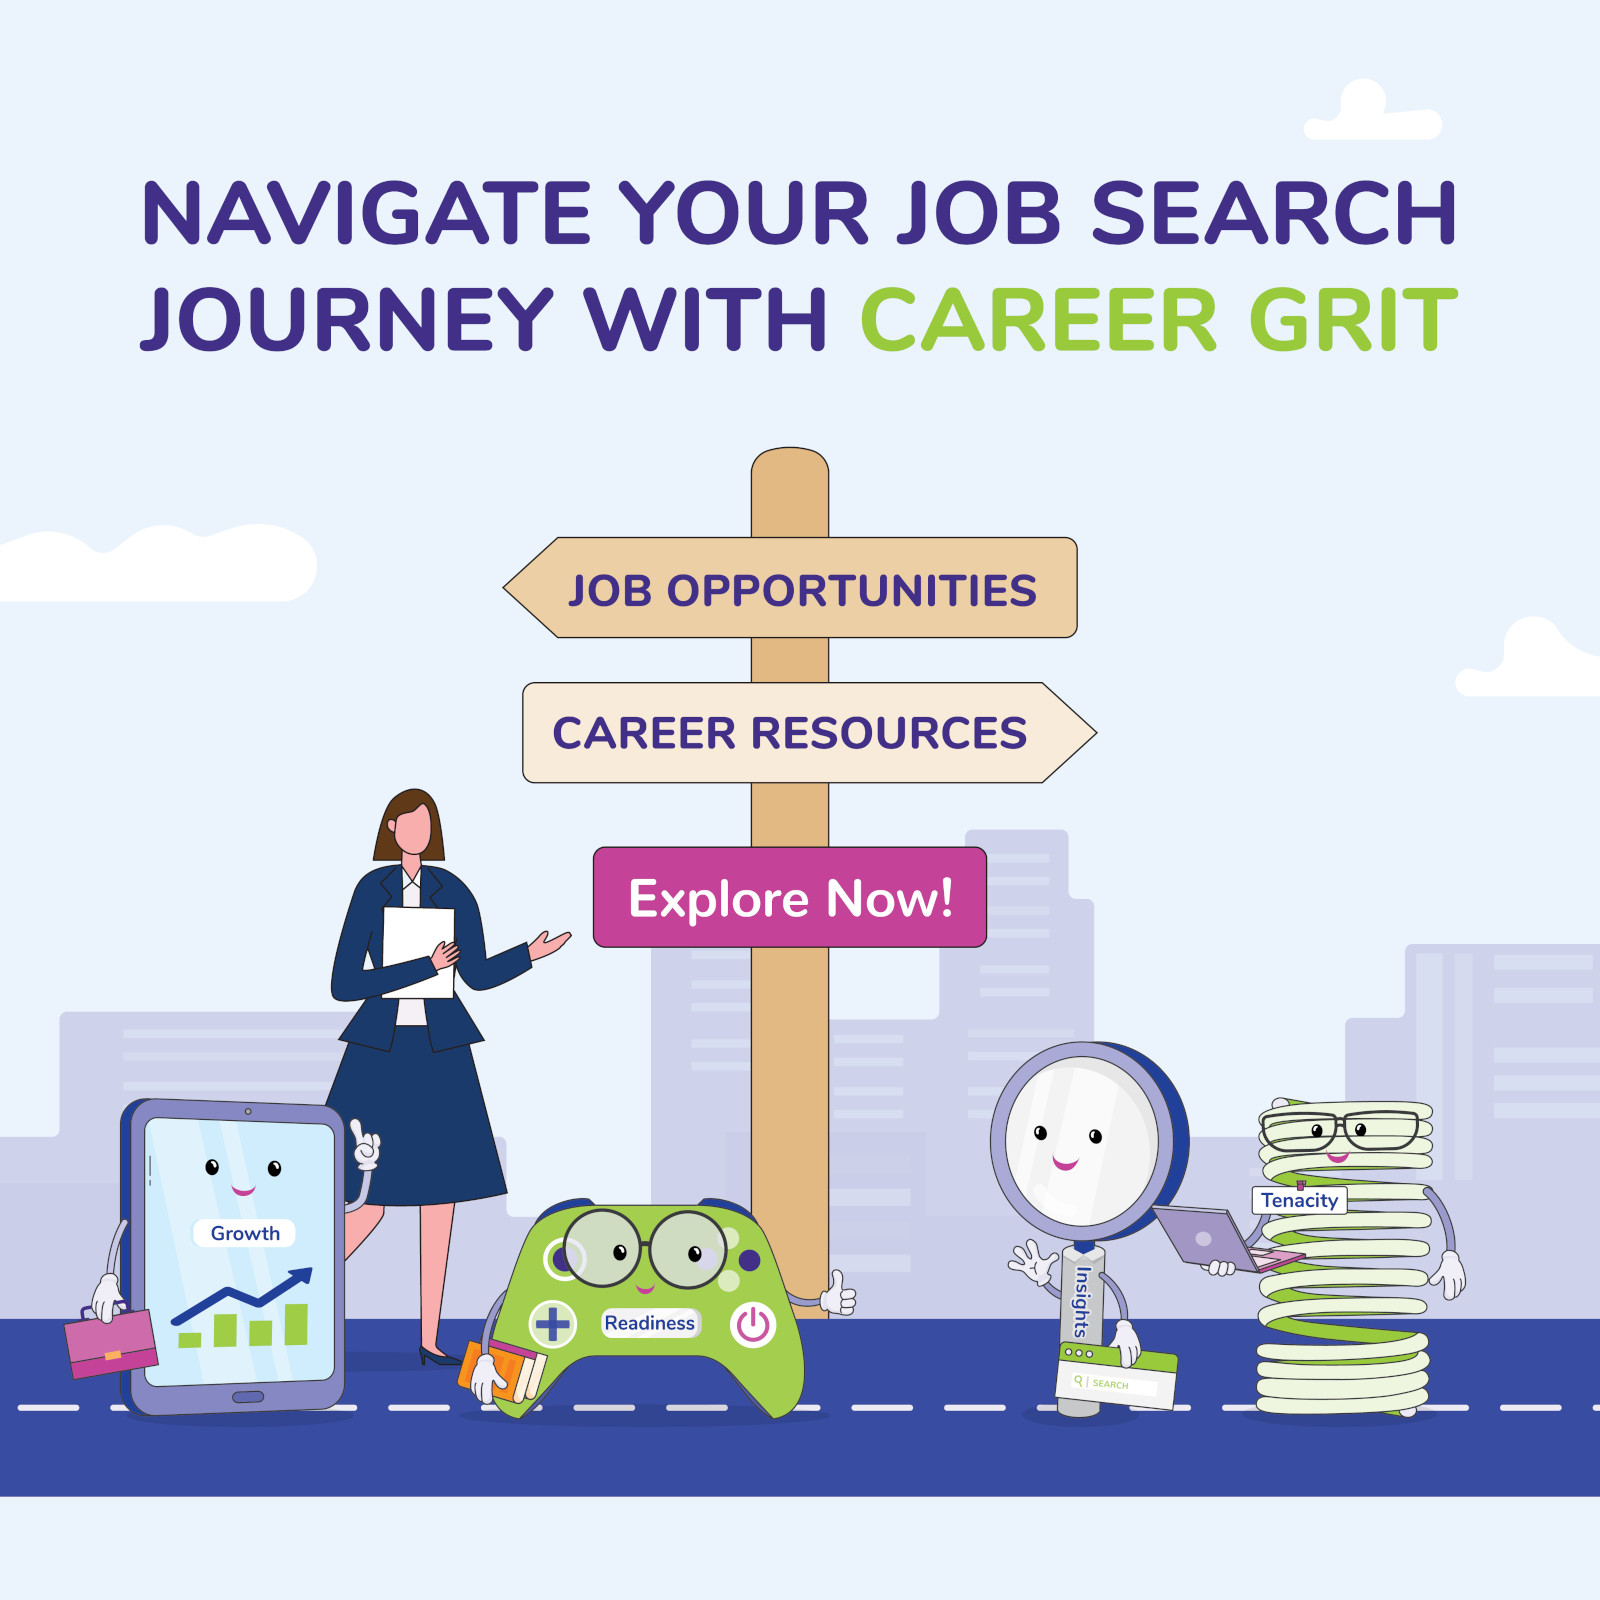 About Career GRIT